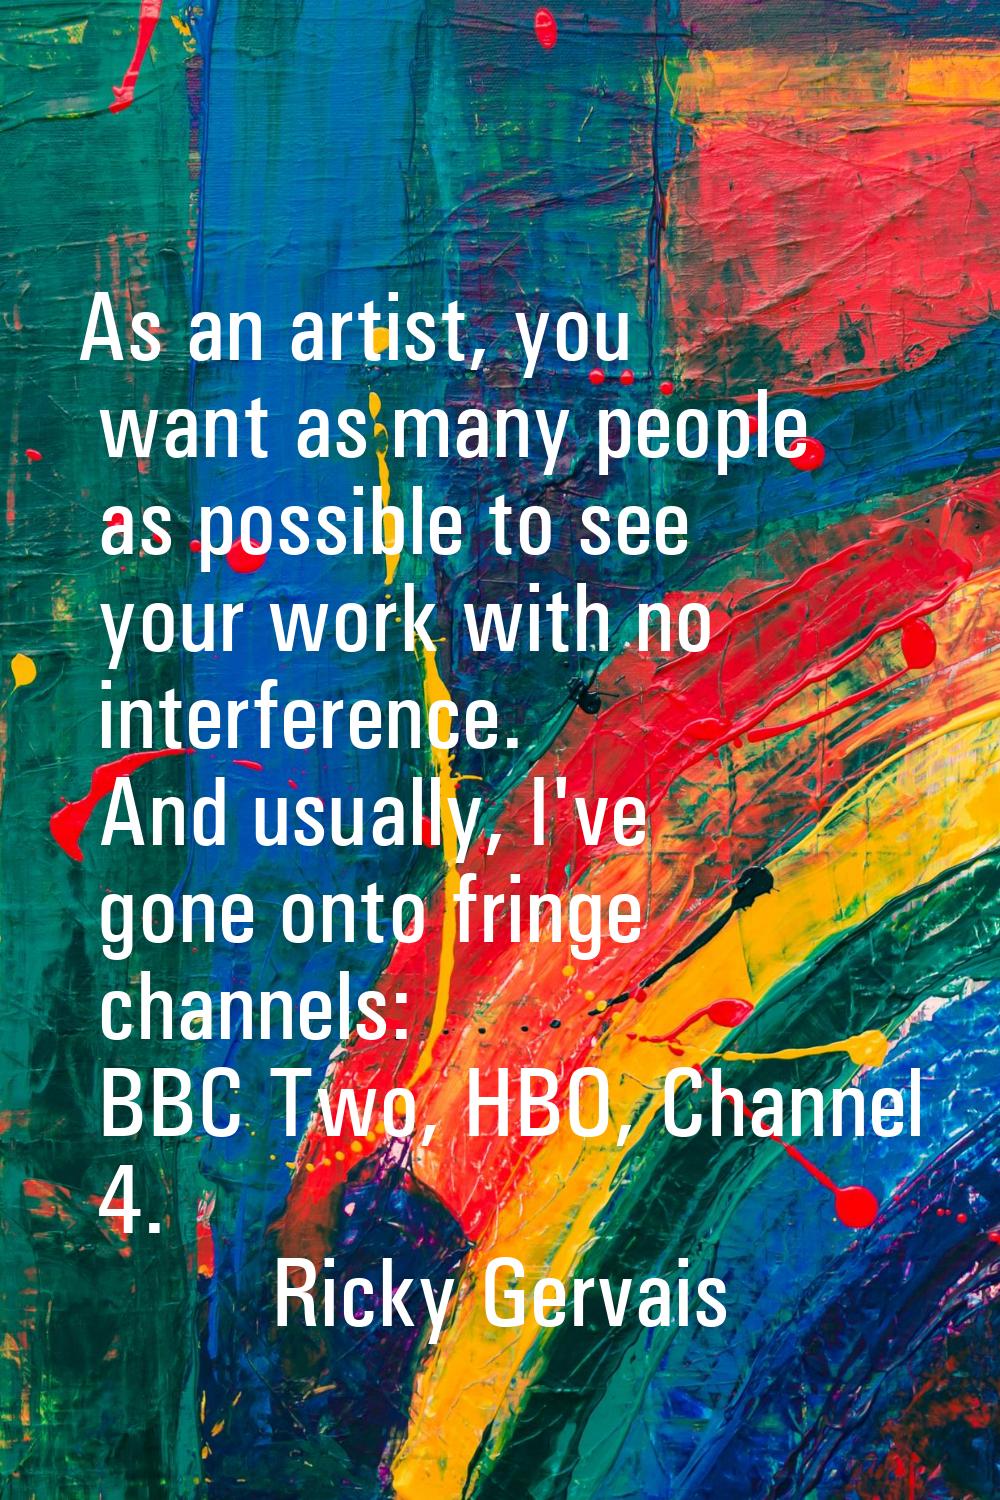 As an artist, you want as many people as possible to see your work with no interference. And usuall